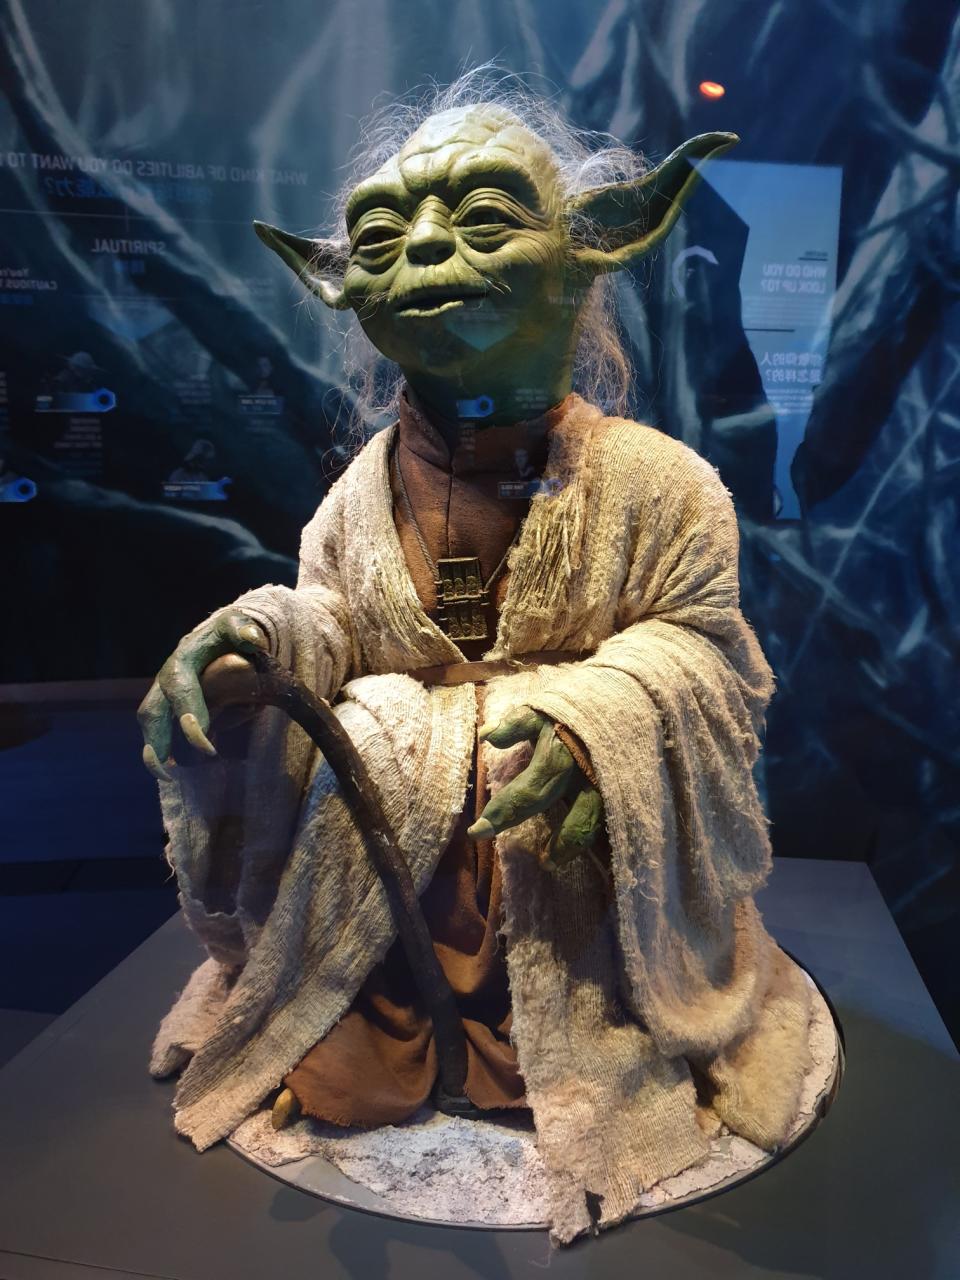 Prop of Yoda made for Star Wars: The Phantom Menace at  the Star Wars Identities exhibition in Singapore at the Artscience Museum. (Photo: Teng Yong Ping)